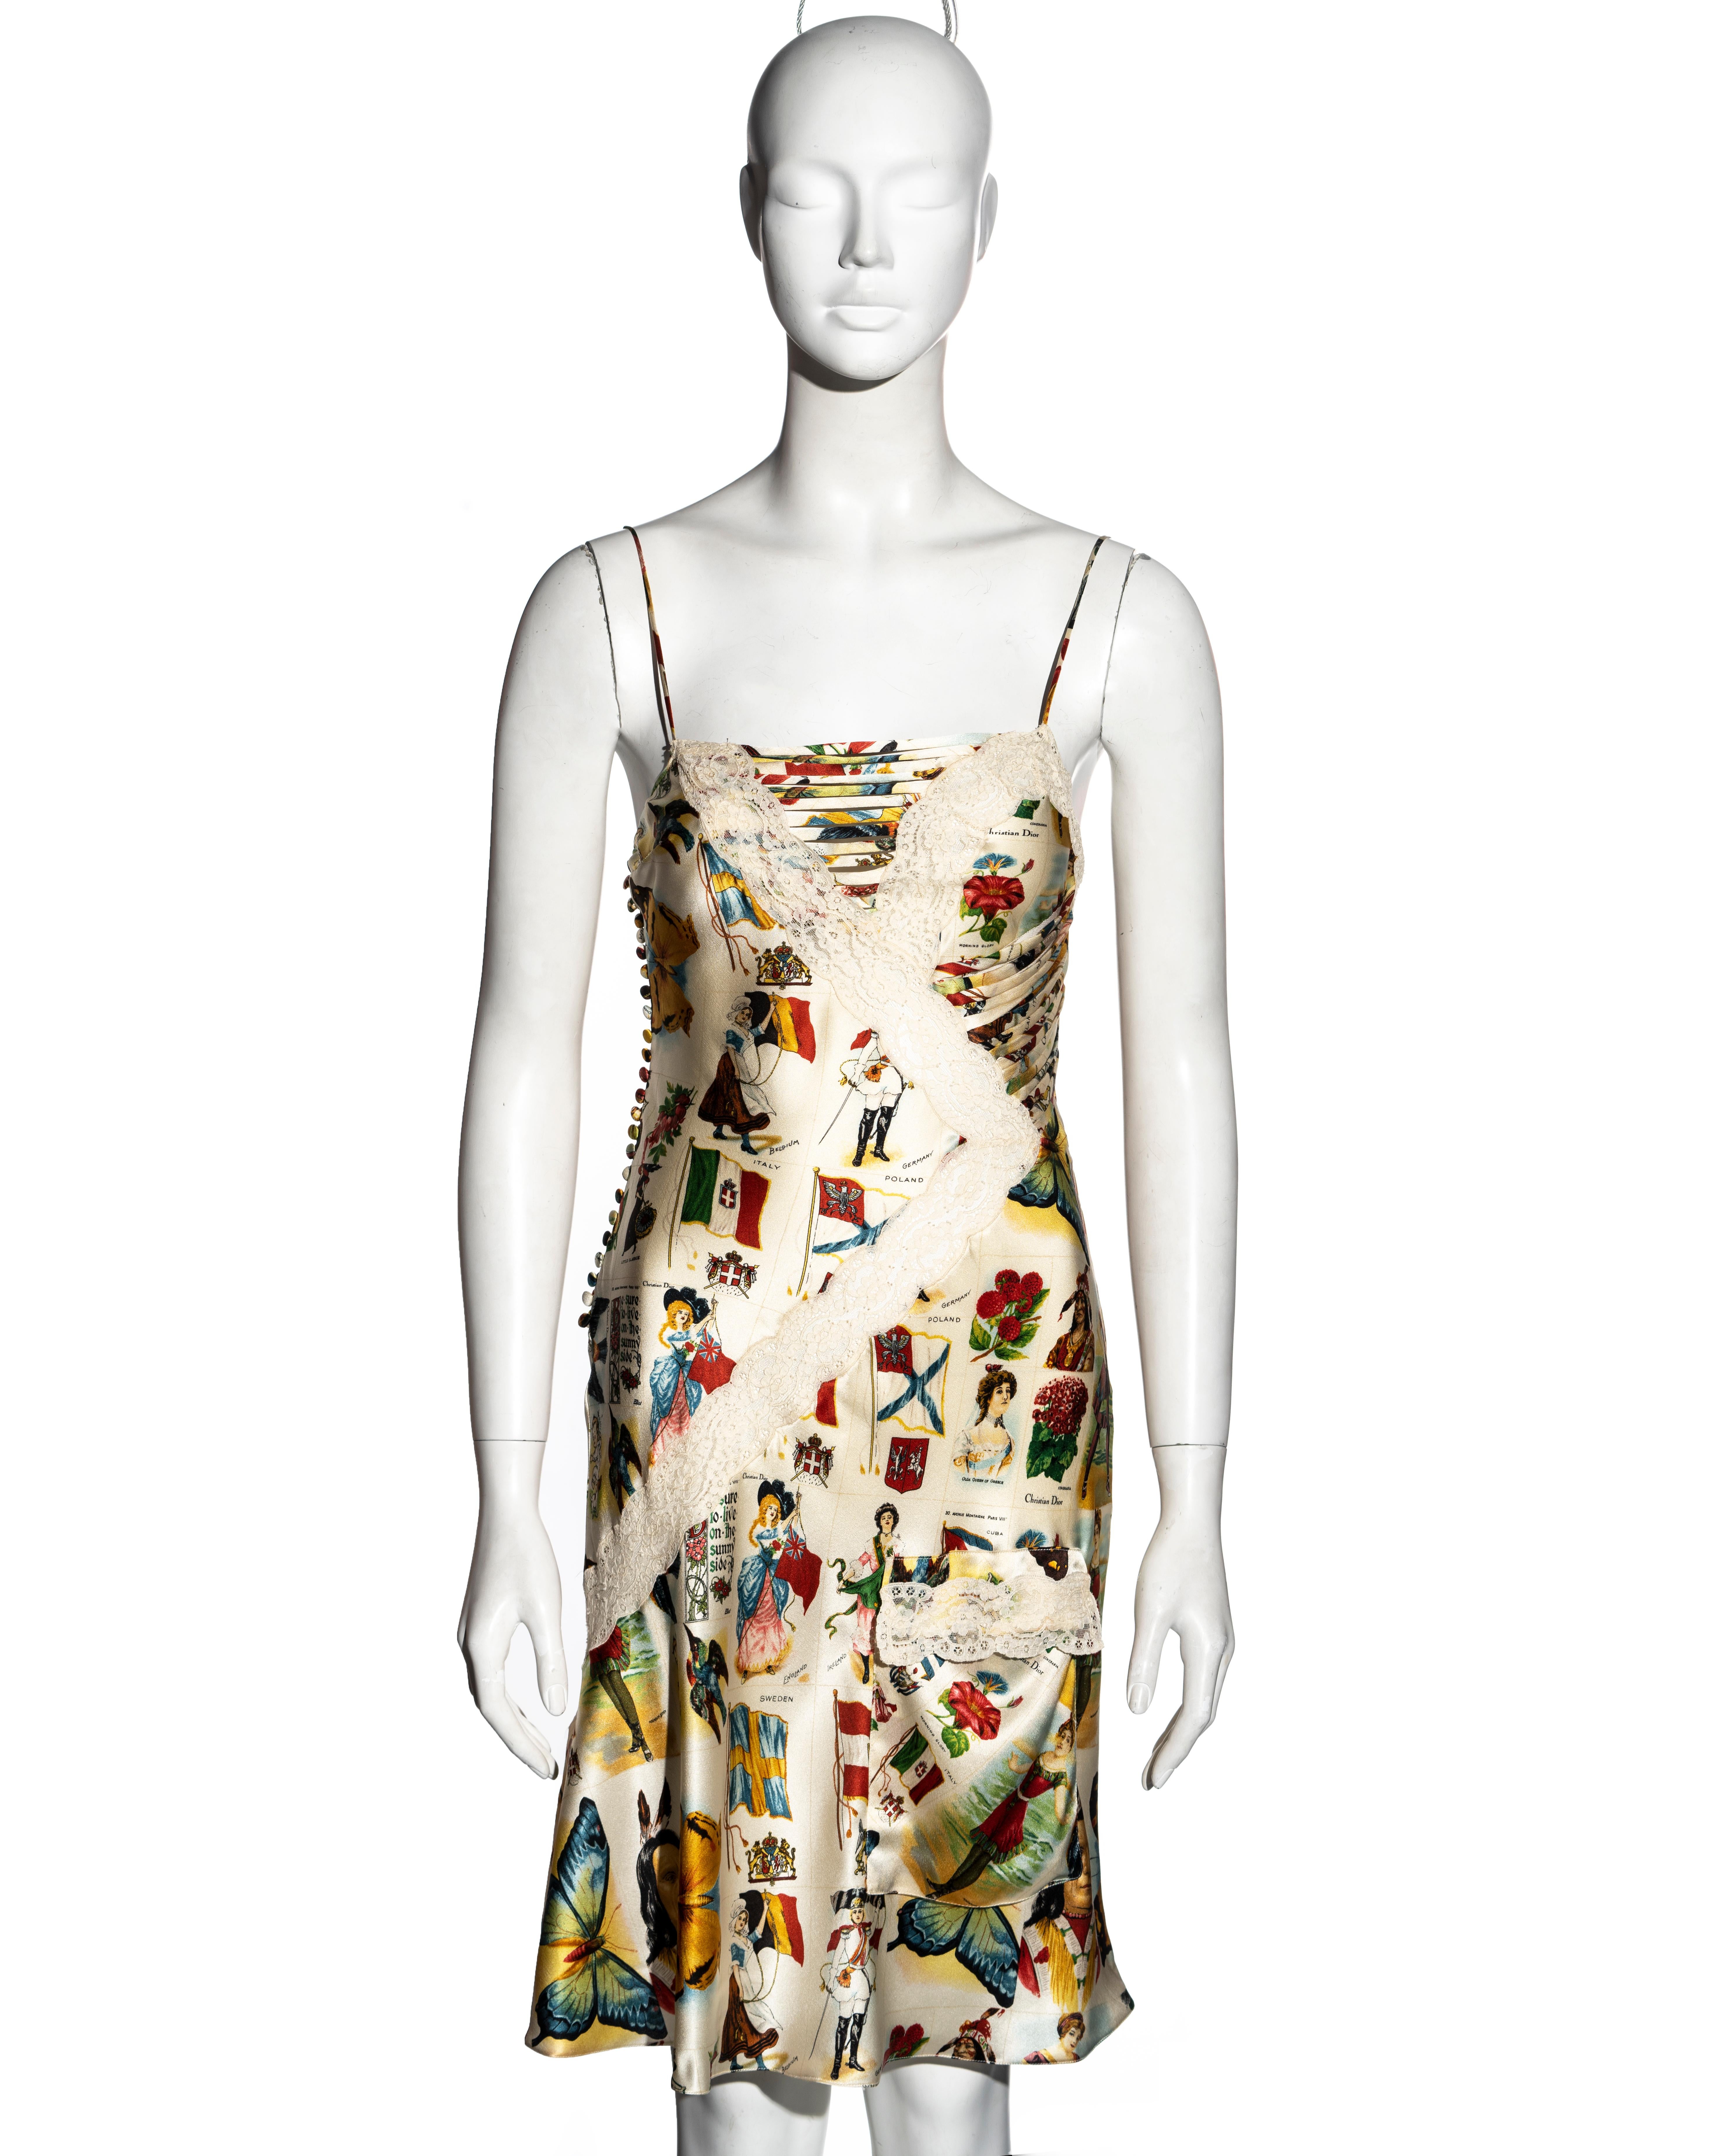 ▪ Christian Dior printed silk slip dress
▪ Designed by John Galliano
▪ Vintage stamp print 
▪ Lace inserts and trim 
▪ Knee-length skirt with two pockets 
▪ Multiple fabric buttons at the side opening 
▪ Spaghetti straps 
▪ FR 38 - UK 10 - US 6
▪